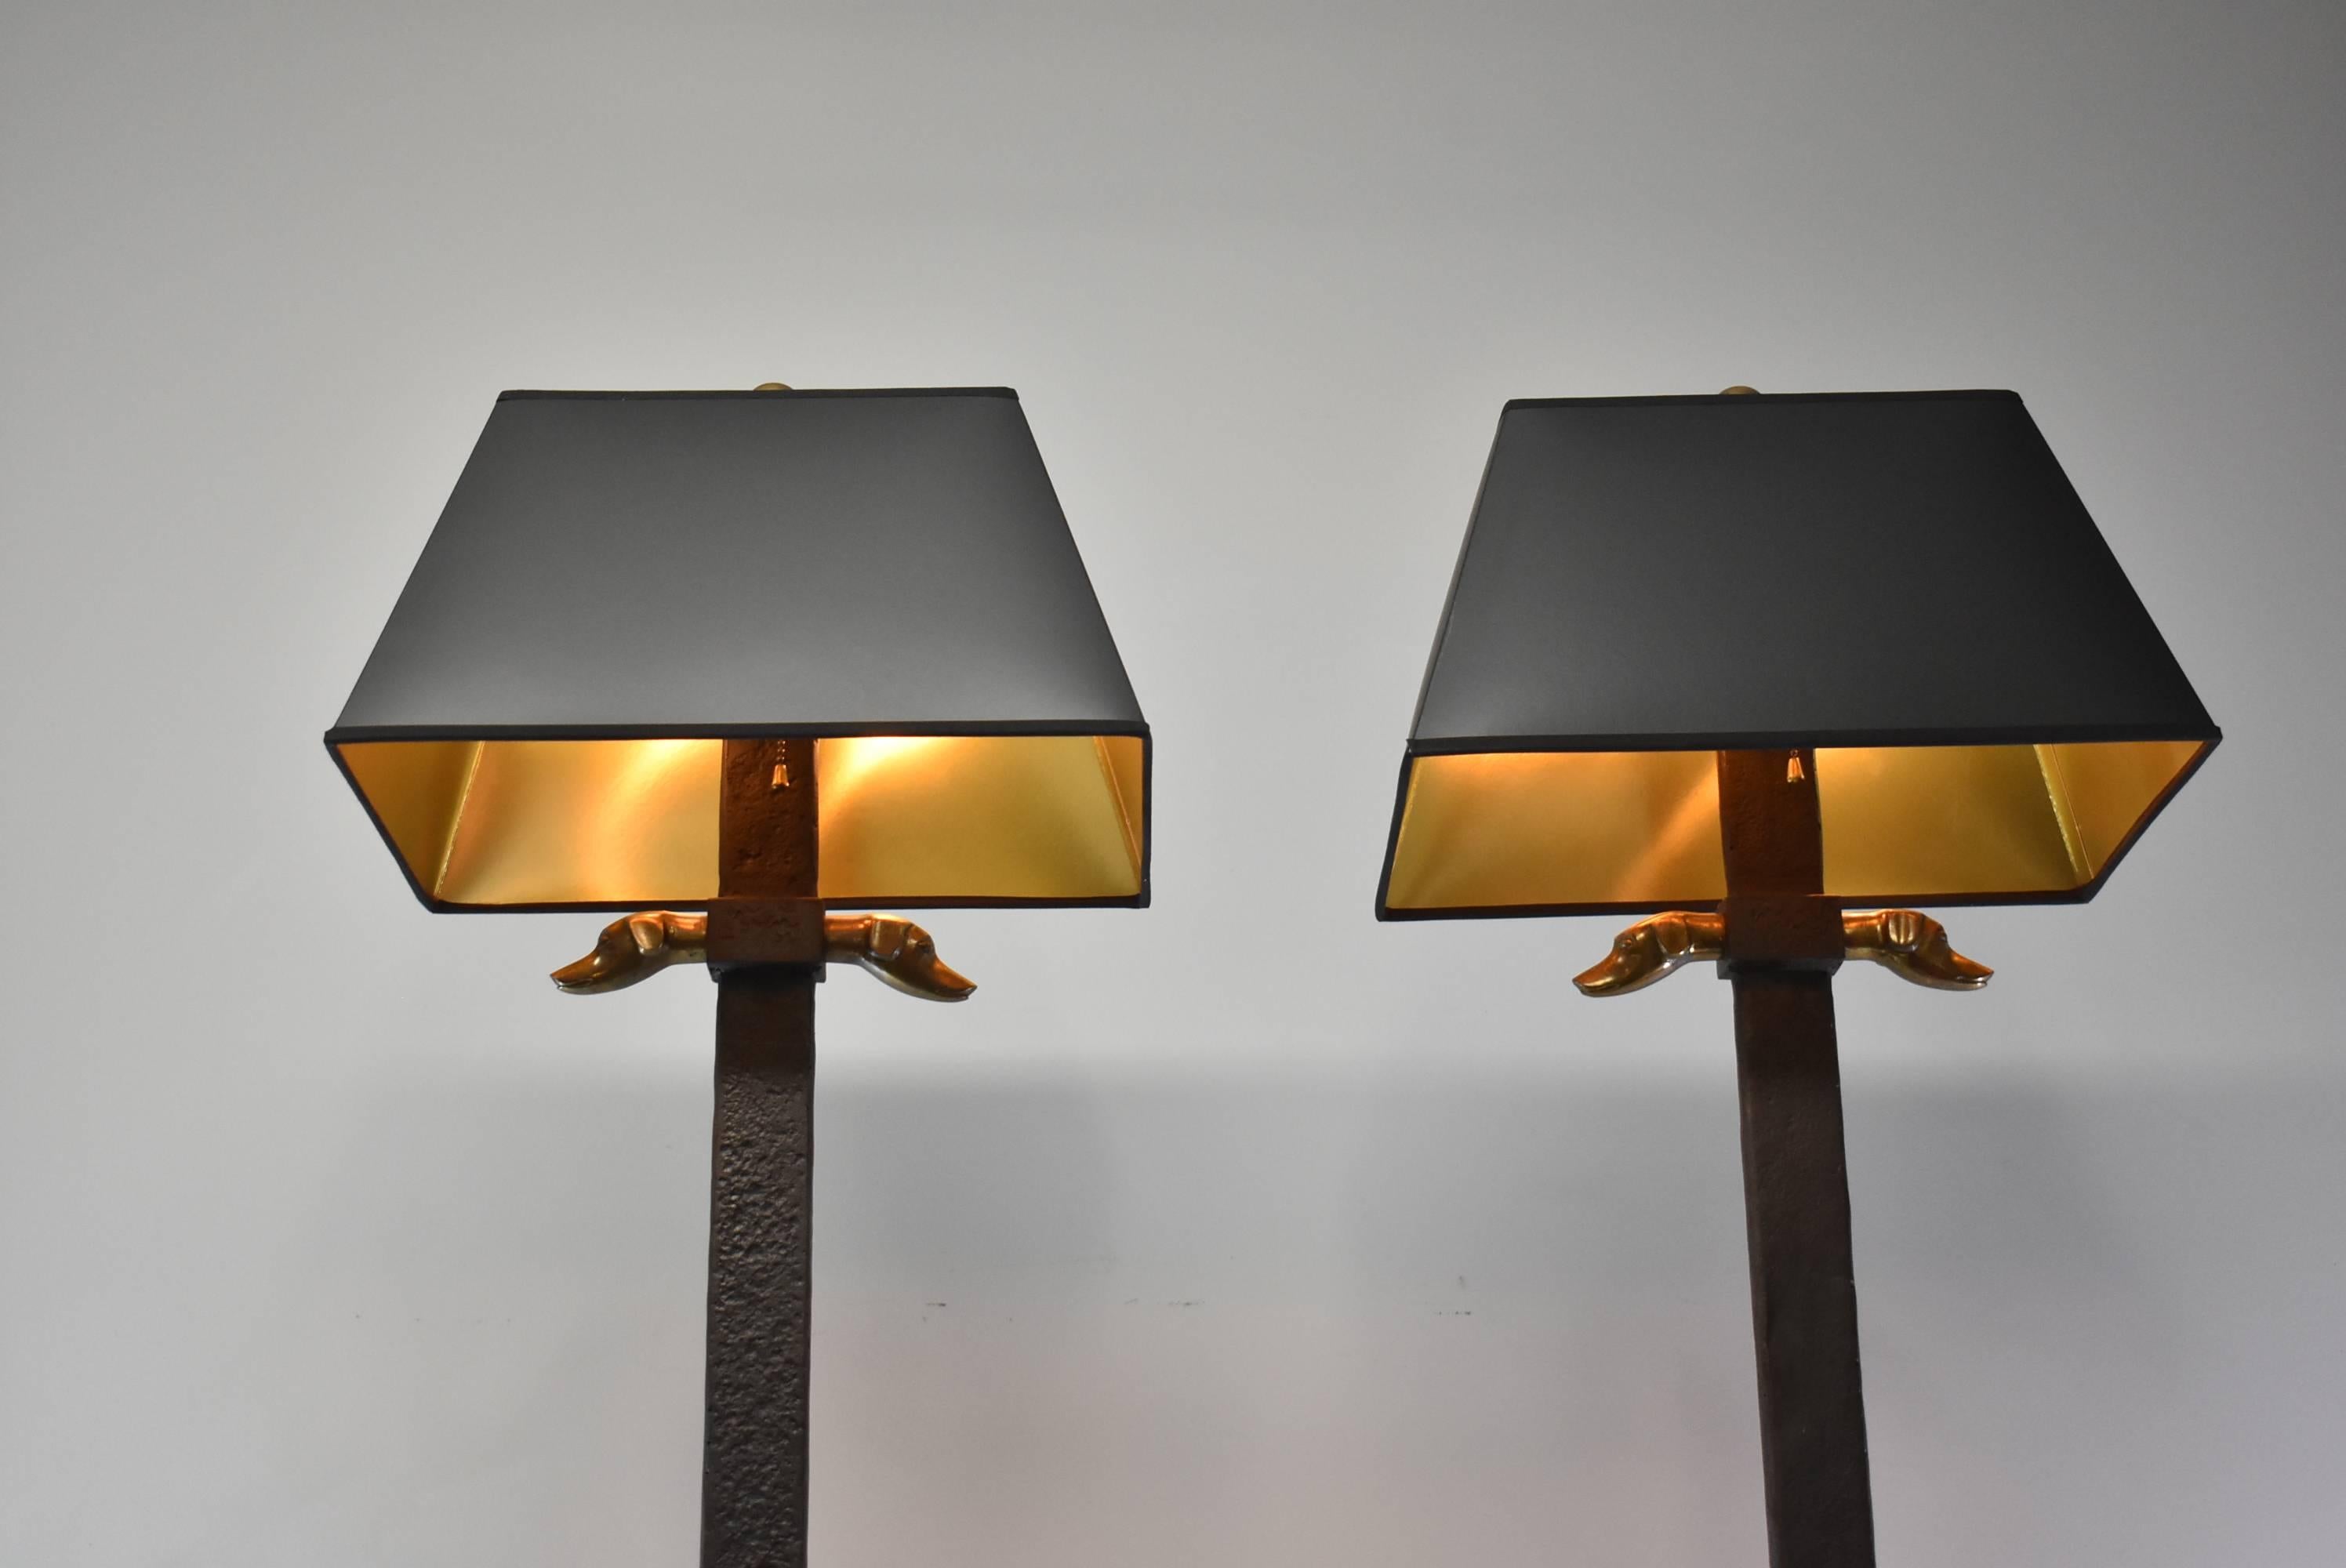 Forged Pair of Iron Floor Lamps with Brass Dog Head Details by Chapman